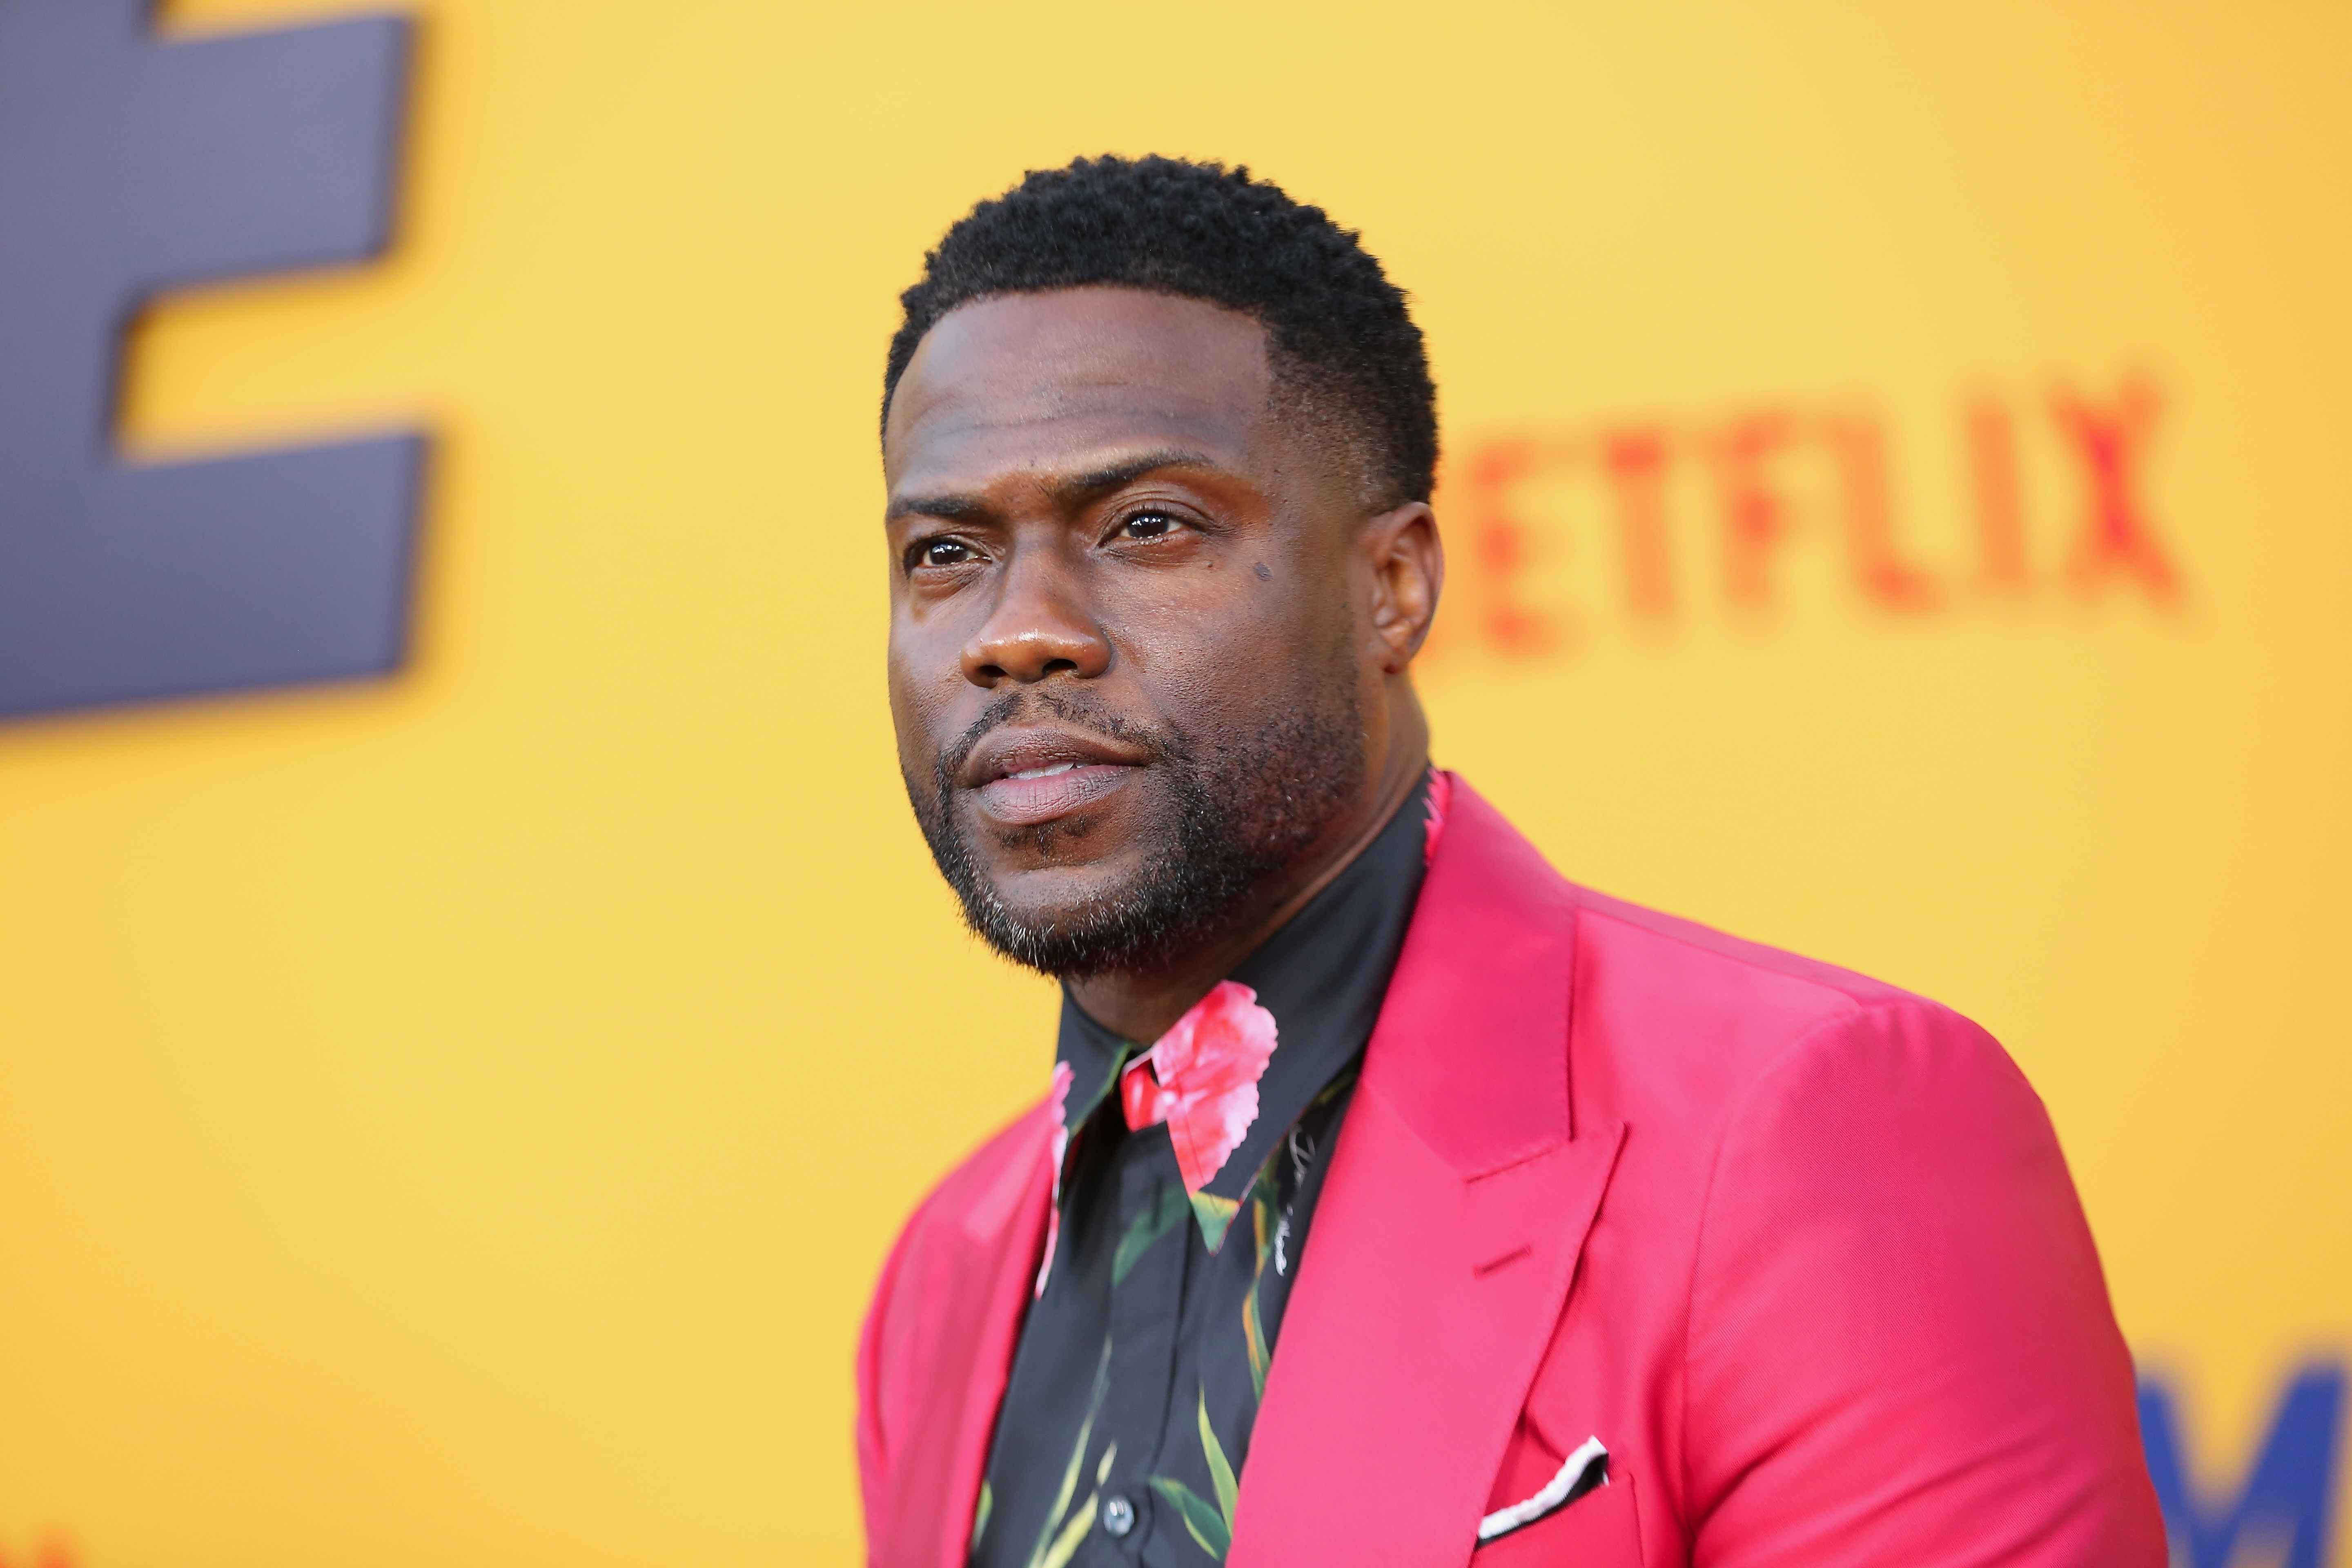 comedian kevin hart attends the los angeles premiere of news photo 1664396014